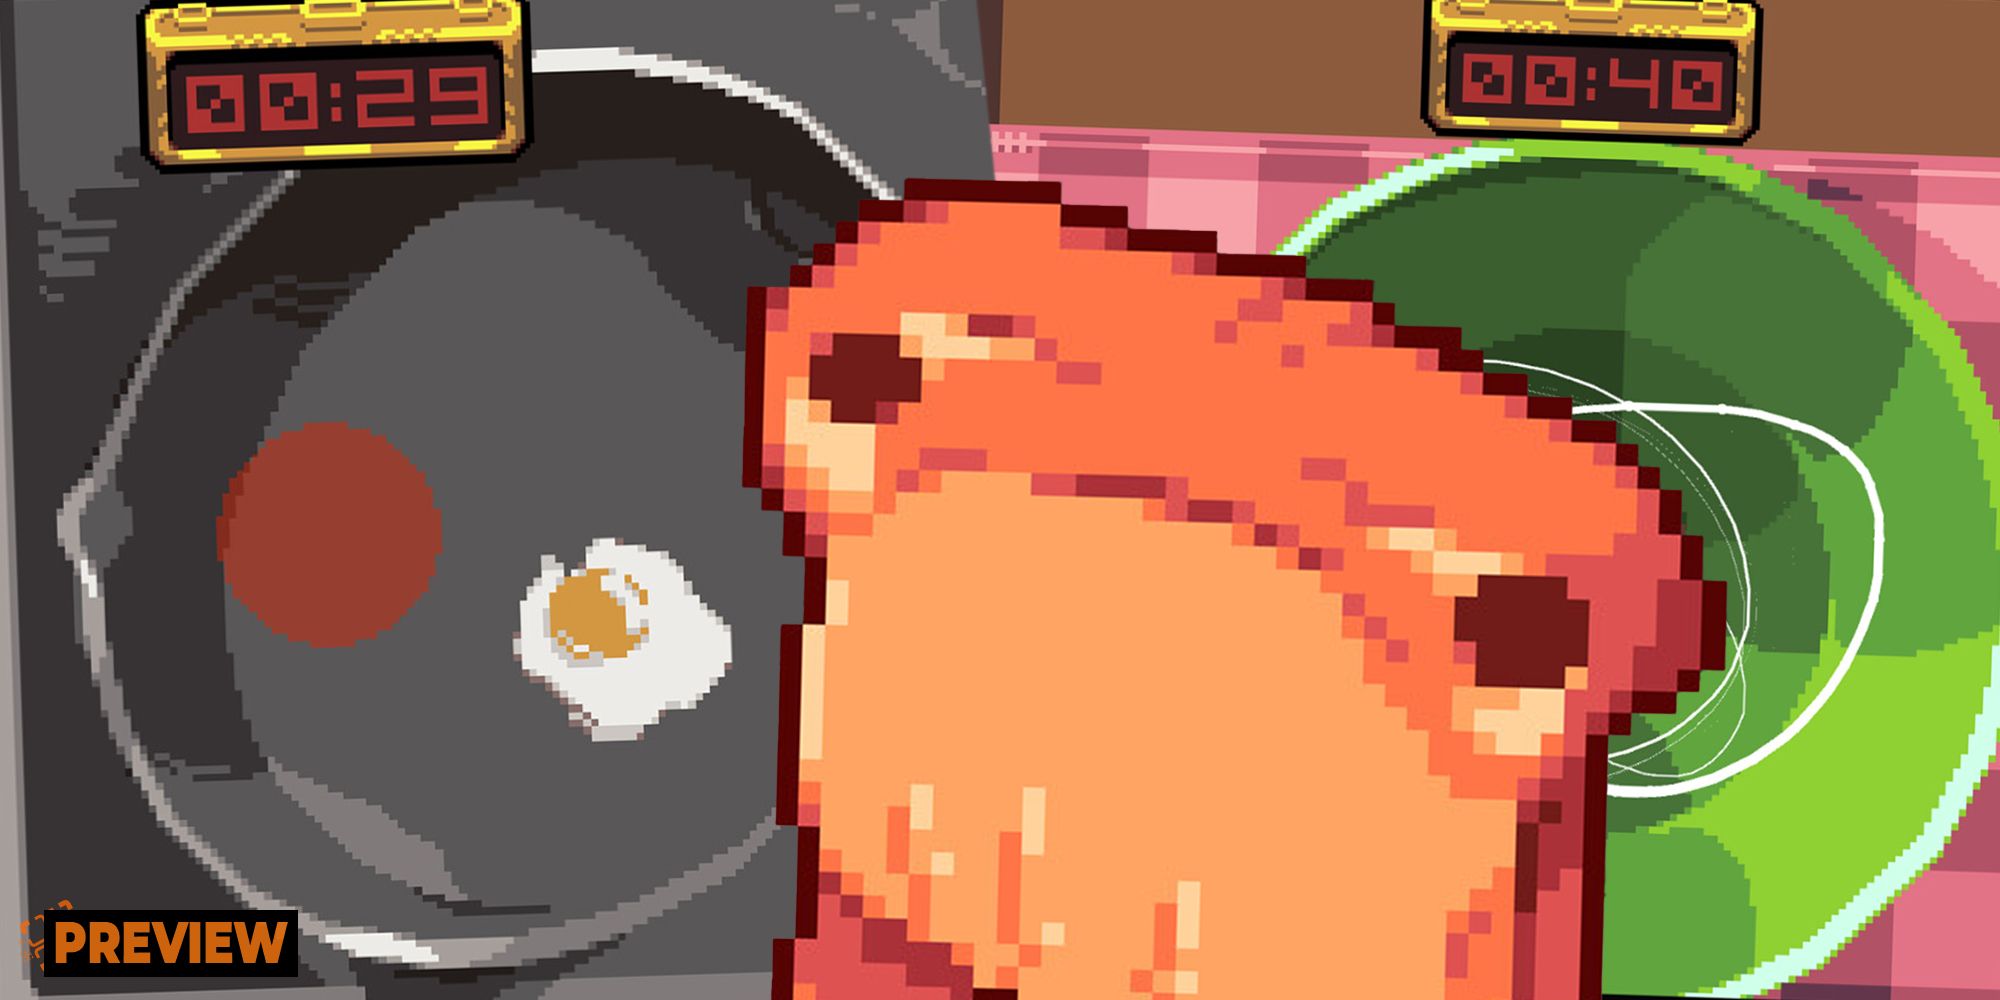 Gladieaters bread monster overlaid on the cooking minigame screen.